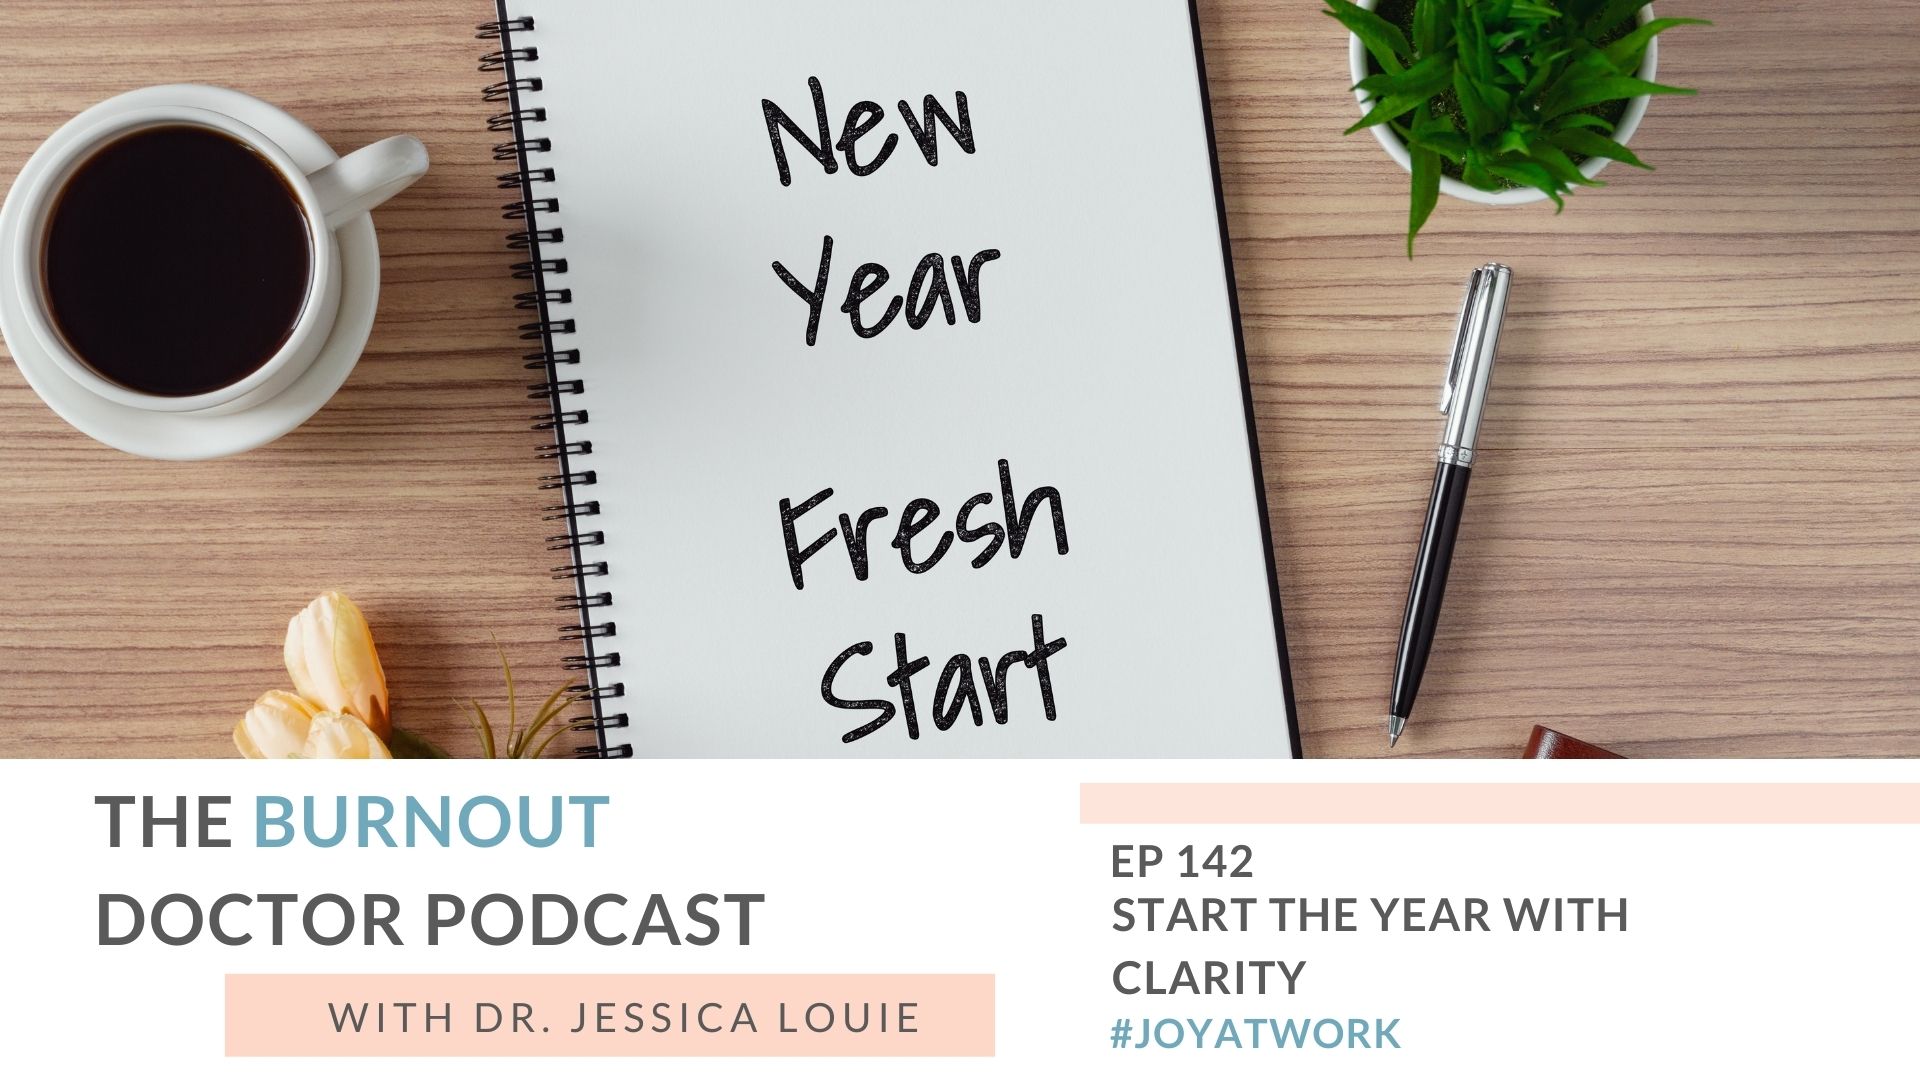 How to start the year with clarity. How to start new year with new goals and goal setting help. The Burnout Doctor Podcast. Clarify Simplify Align planner and journal.